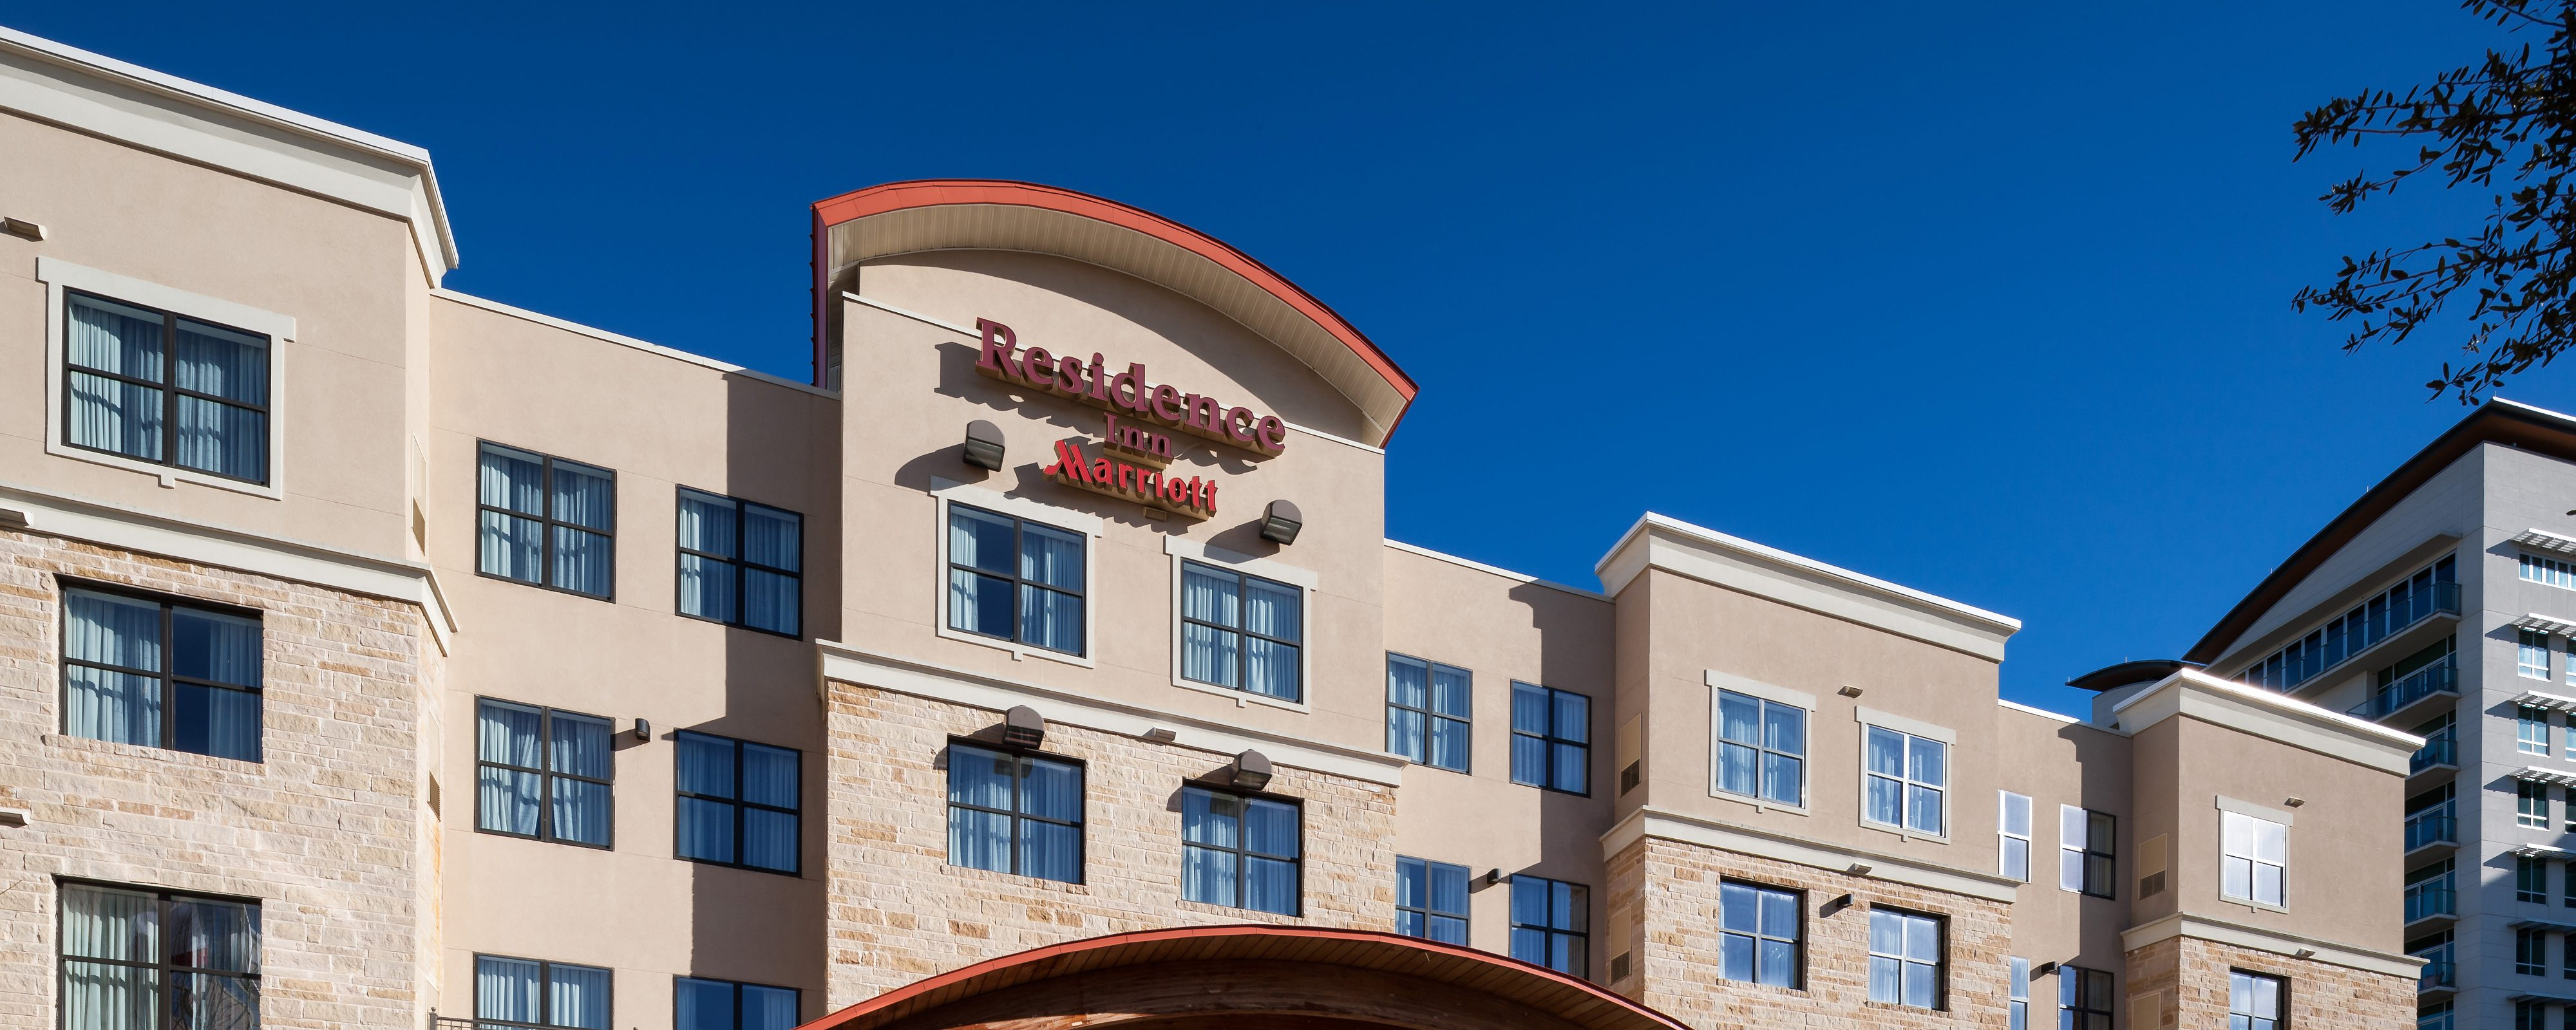 Hotels Near Ft. Worth Convention Center Arena | Residence Inn Ft - Map Of Hotels Near Fort Worth Texas Convention Center